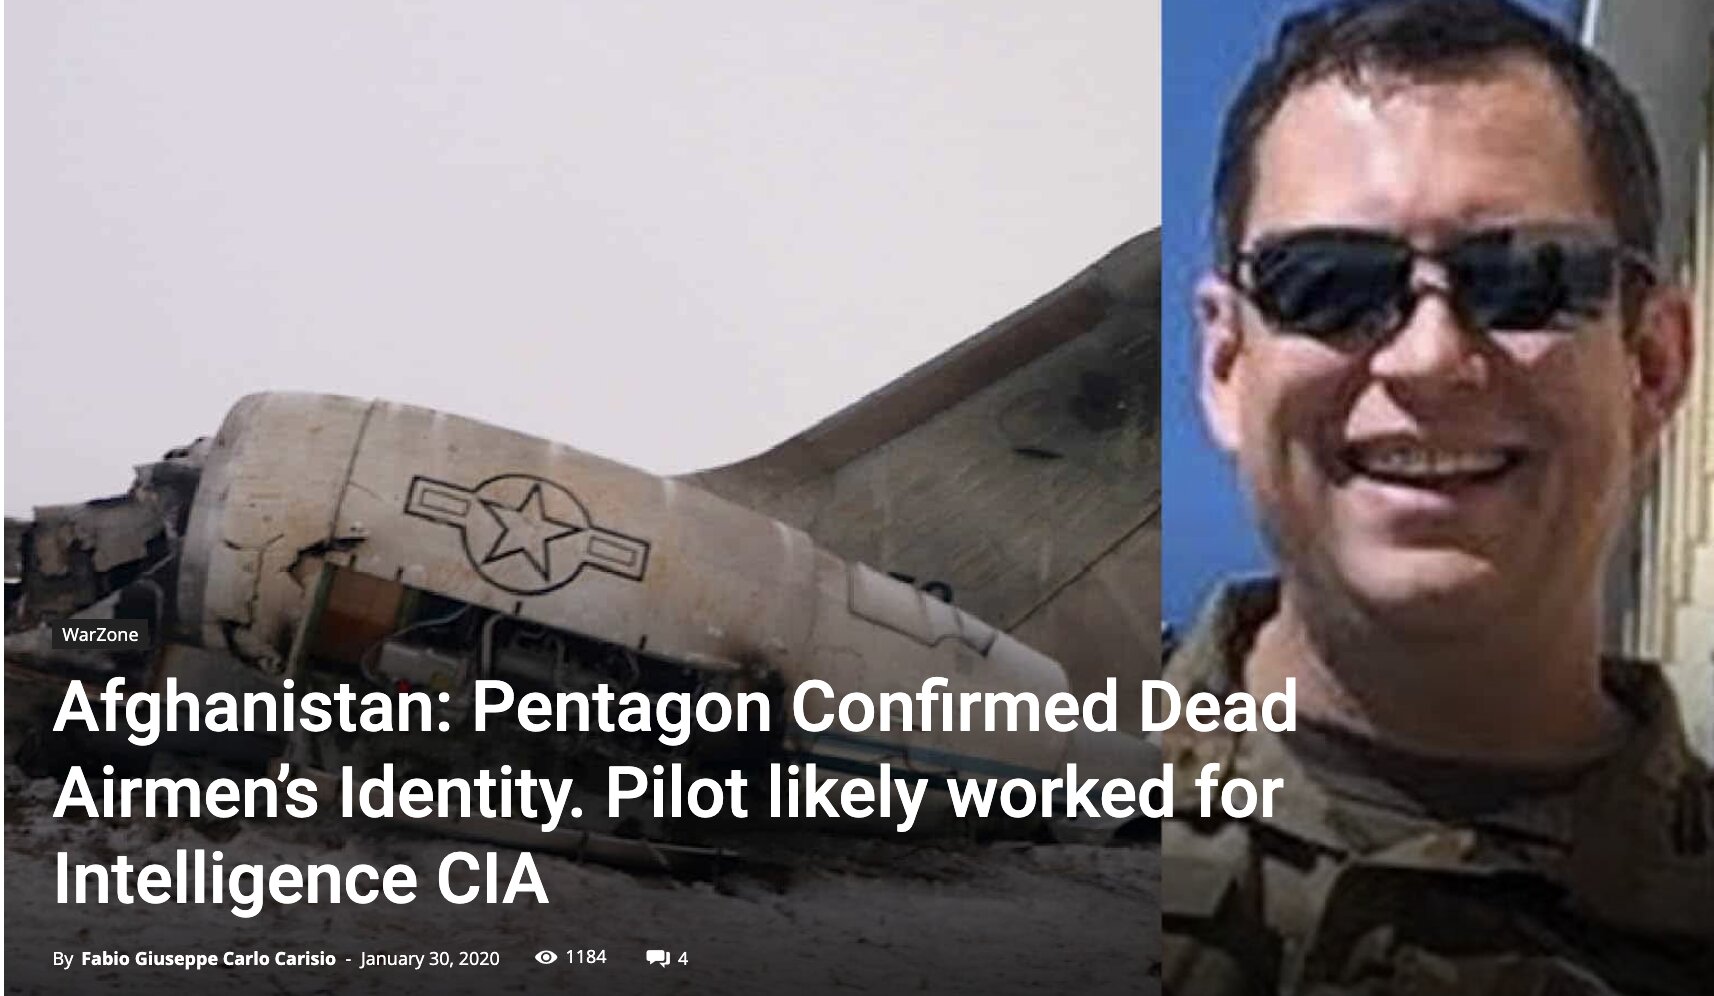 Afghanistan: Pentagon Confirmed Dead Airmen’s Identity. Pilot likely worked for Intelligence CIA